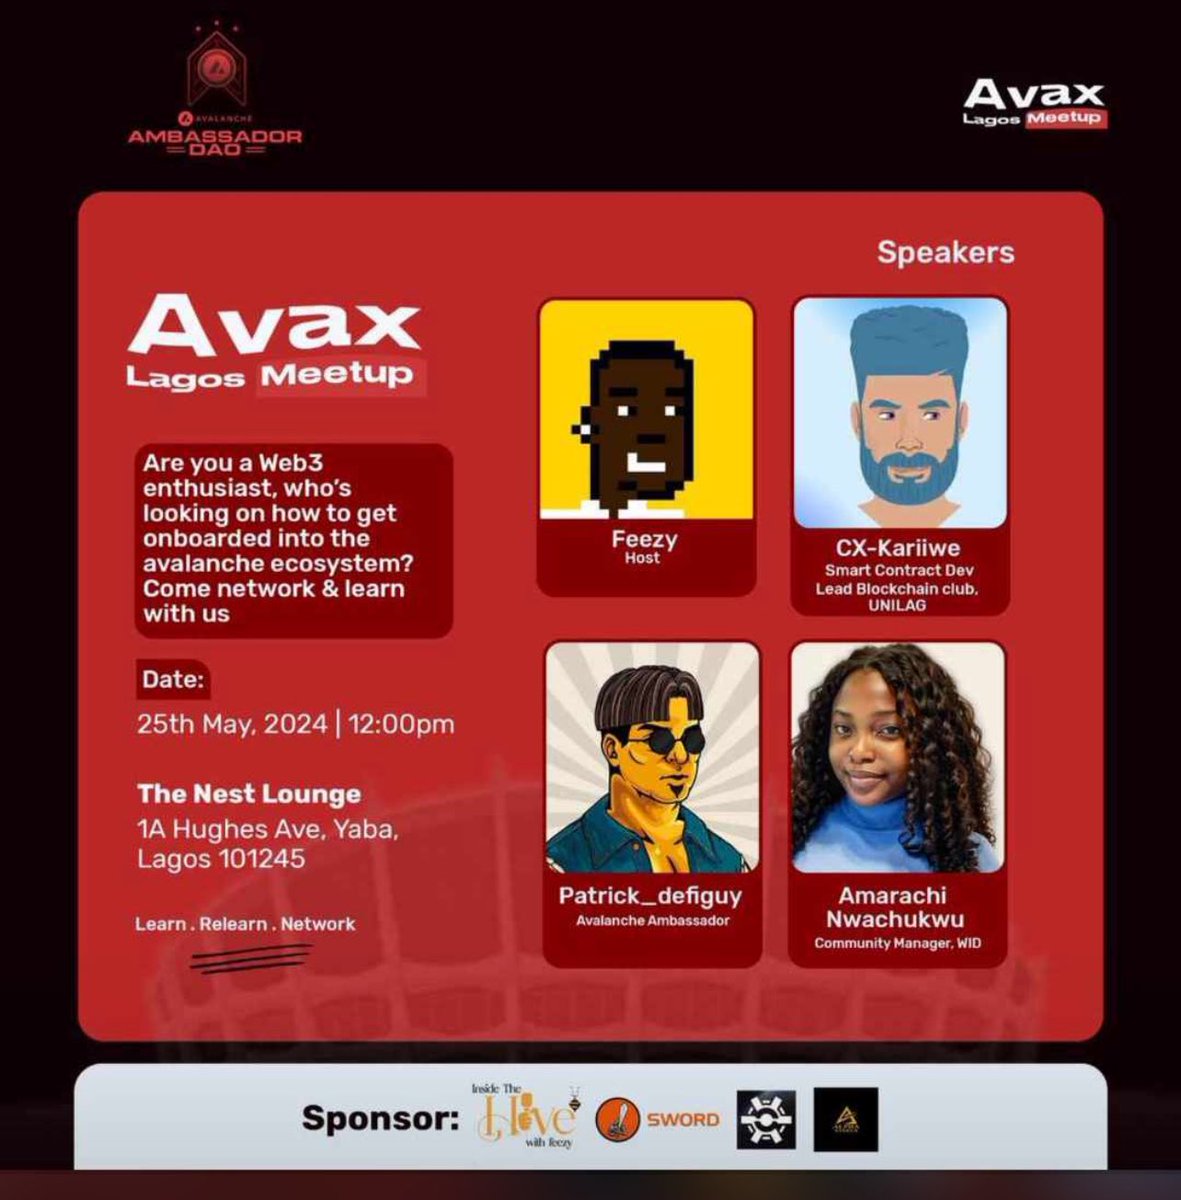 GM GM🤗 first @AvaxDAO_ meetup in Nigeria and spaces are filled up already! Can’t wait to see y’all. Of course I’ll be giving a brief sponsorship speech on @heroesofnft at this event. Shoutout to the ambassadors in Nigeria @that_techieboy @Patrick_DefiGuy for planning this 💯